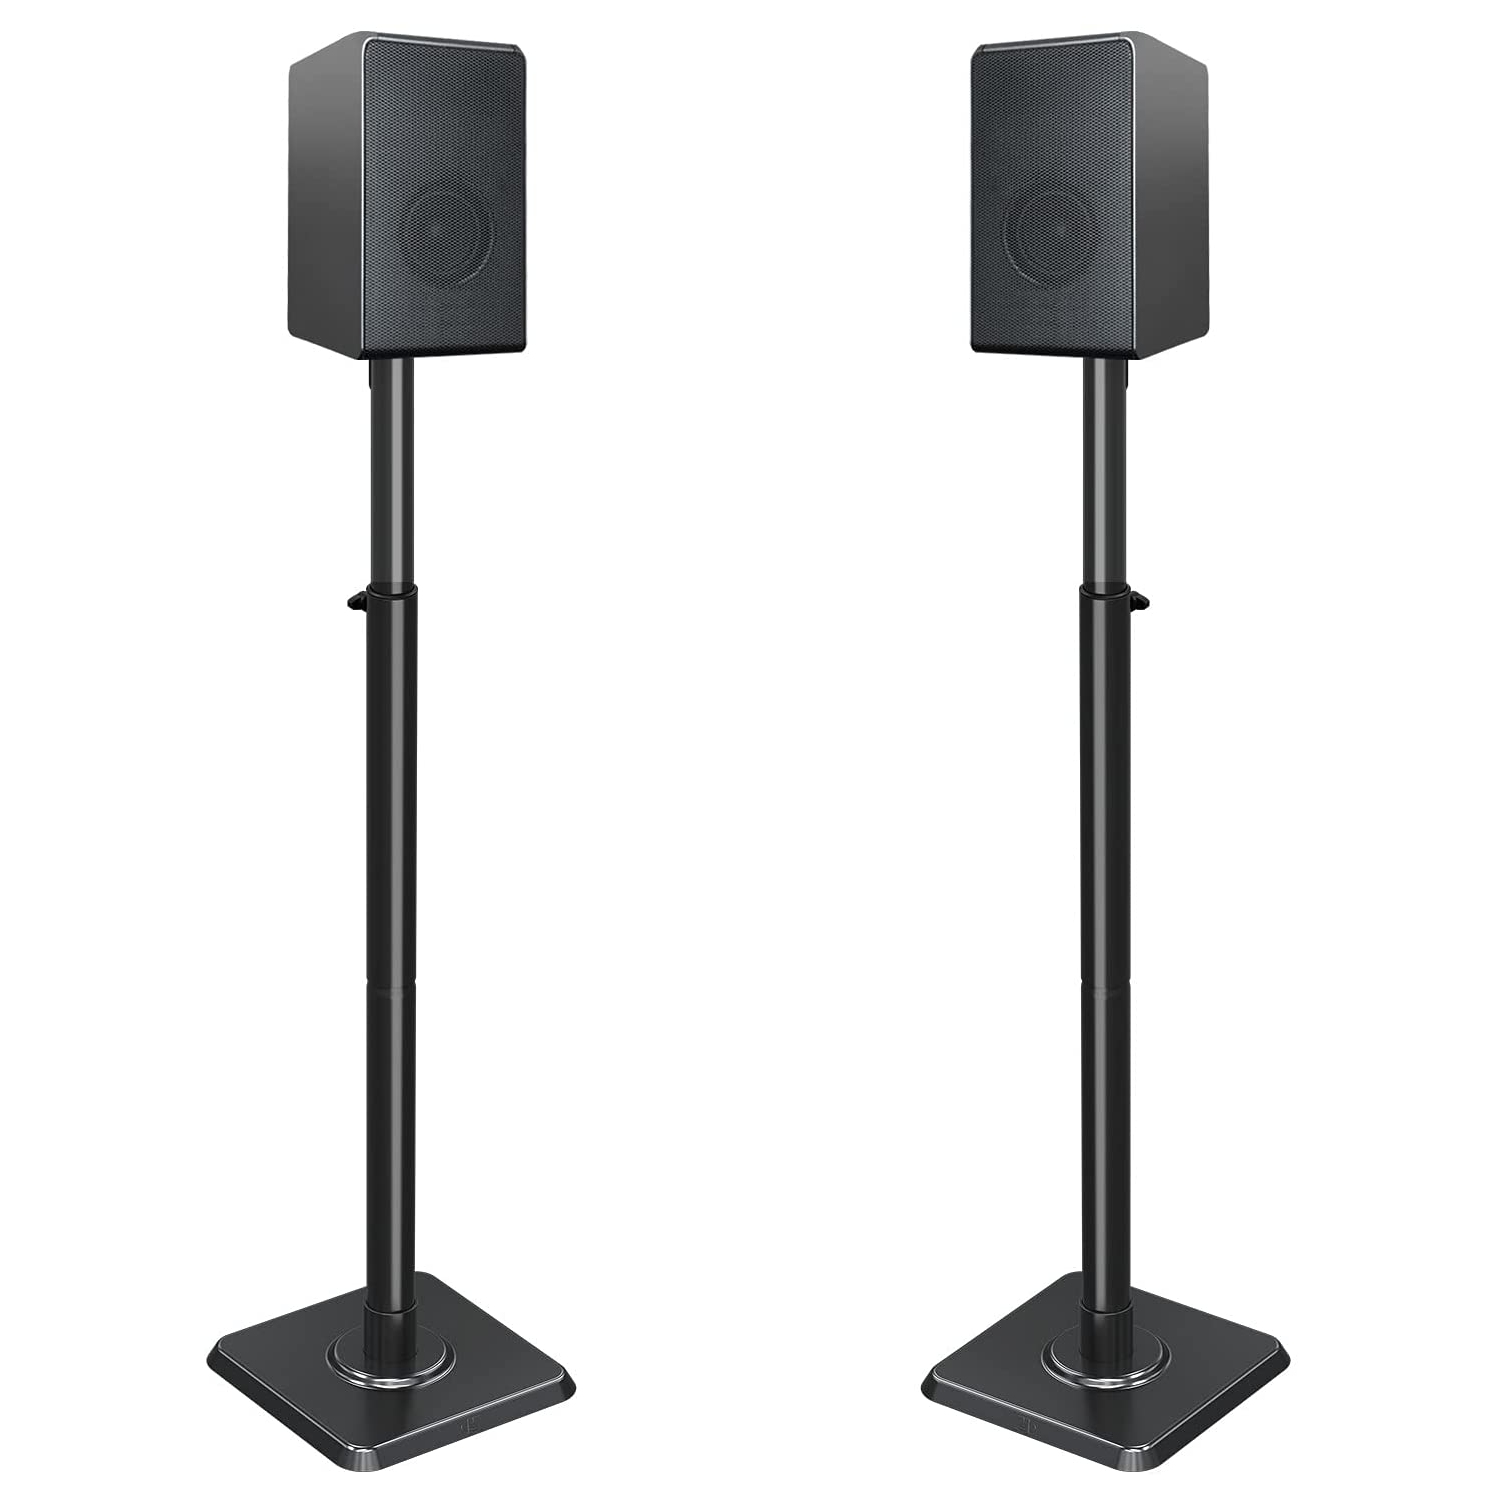 Mounting Dream Universal Speaker Stands Height Adjustable Set of 2 Speaker Stands Extend 33"-42", Compatible with VIZIO, Samsung, Bose, JBL Speakers, up to 11 lbs, Stable Base Cable Management MD5402